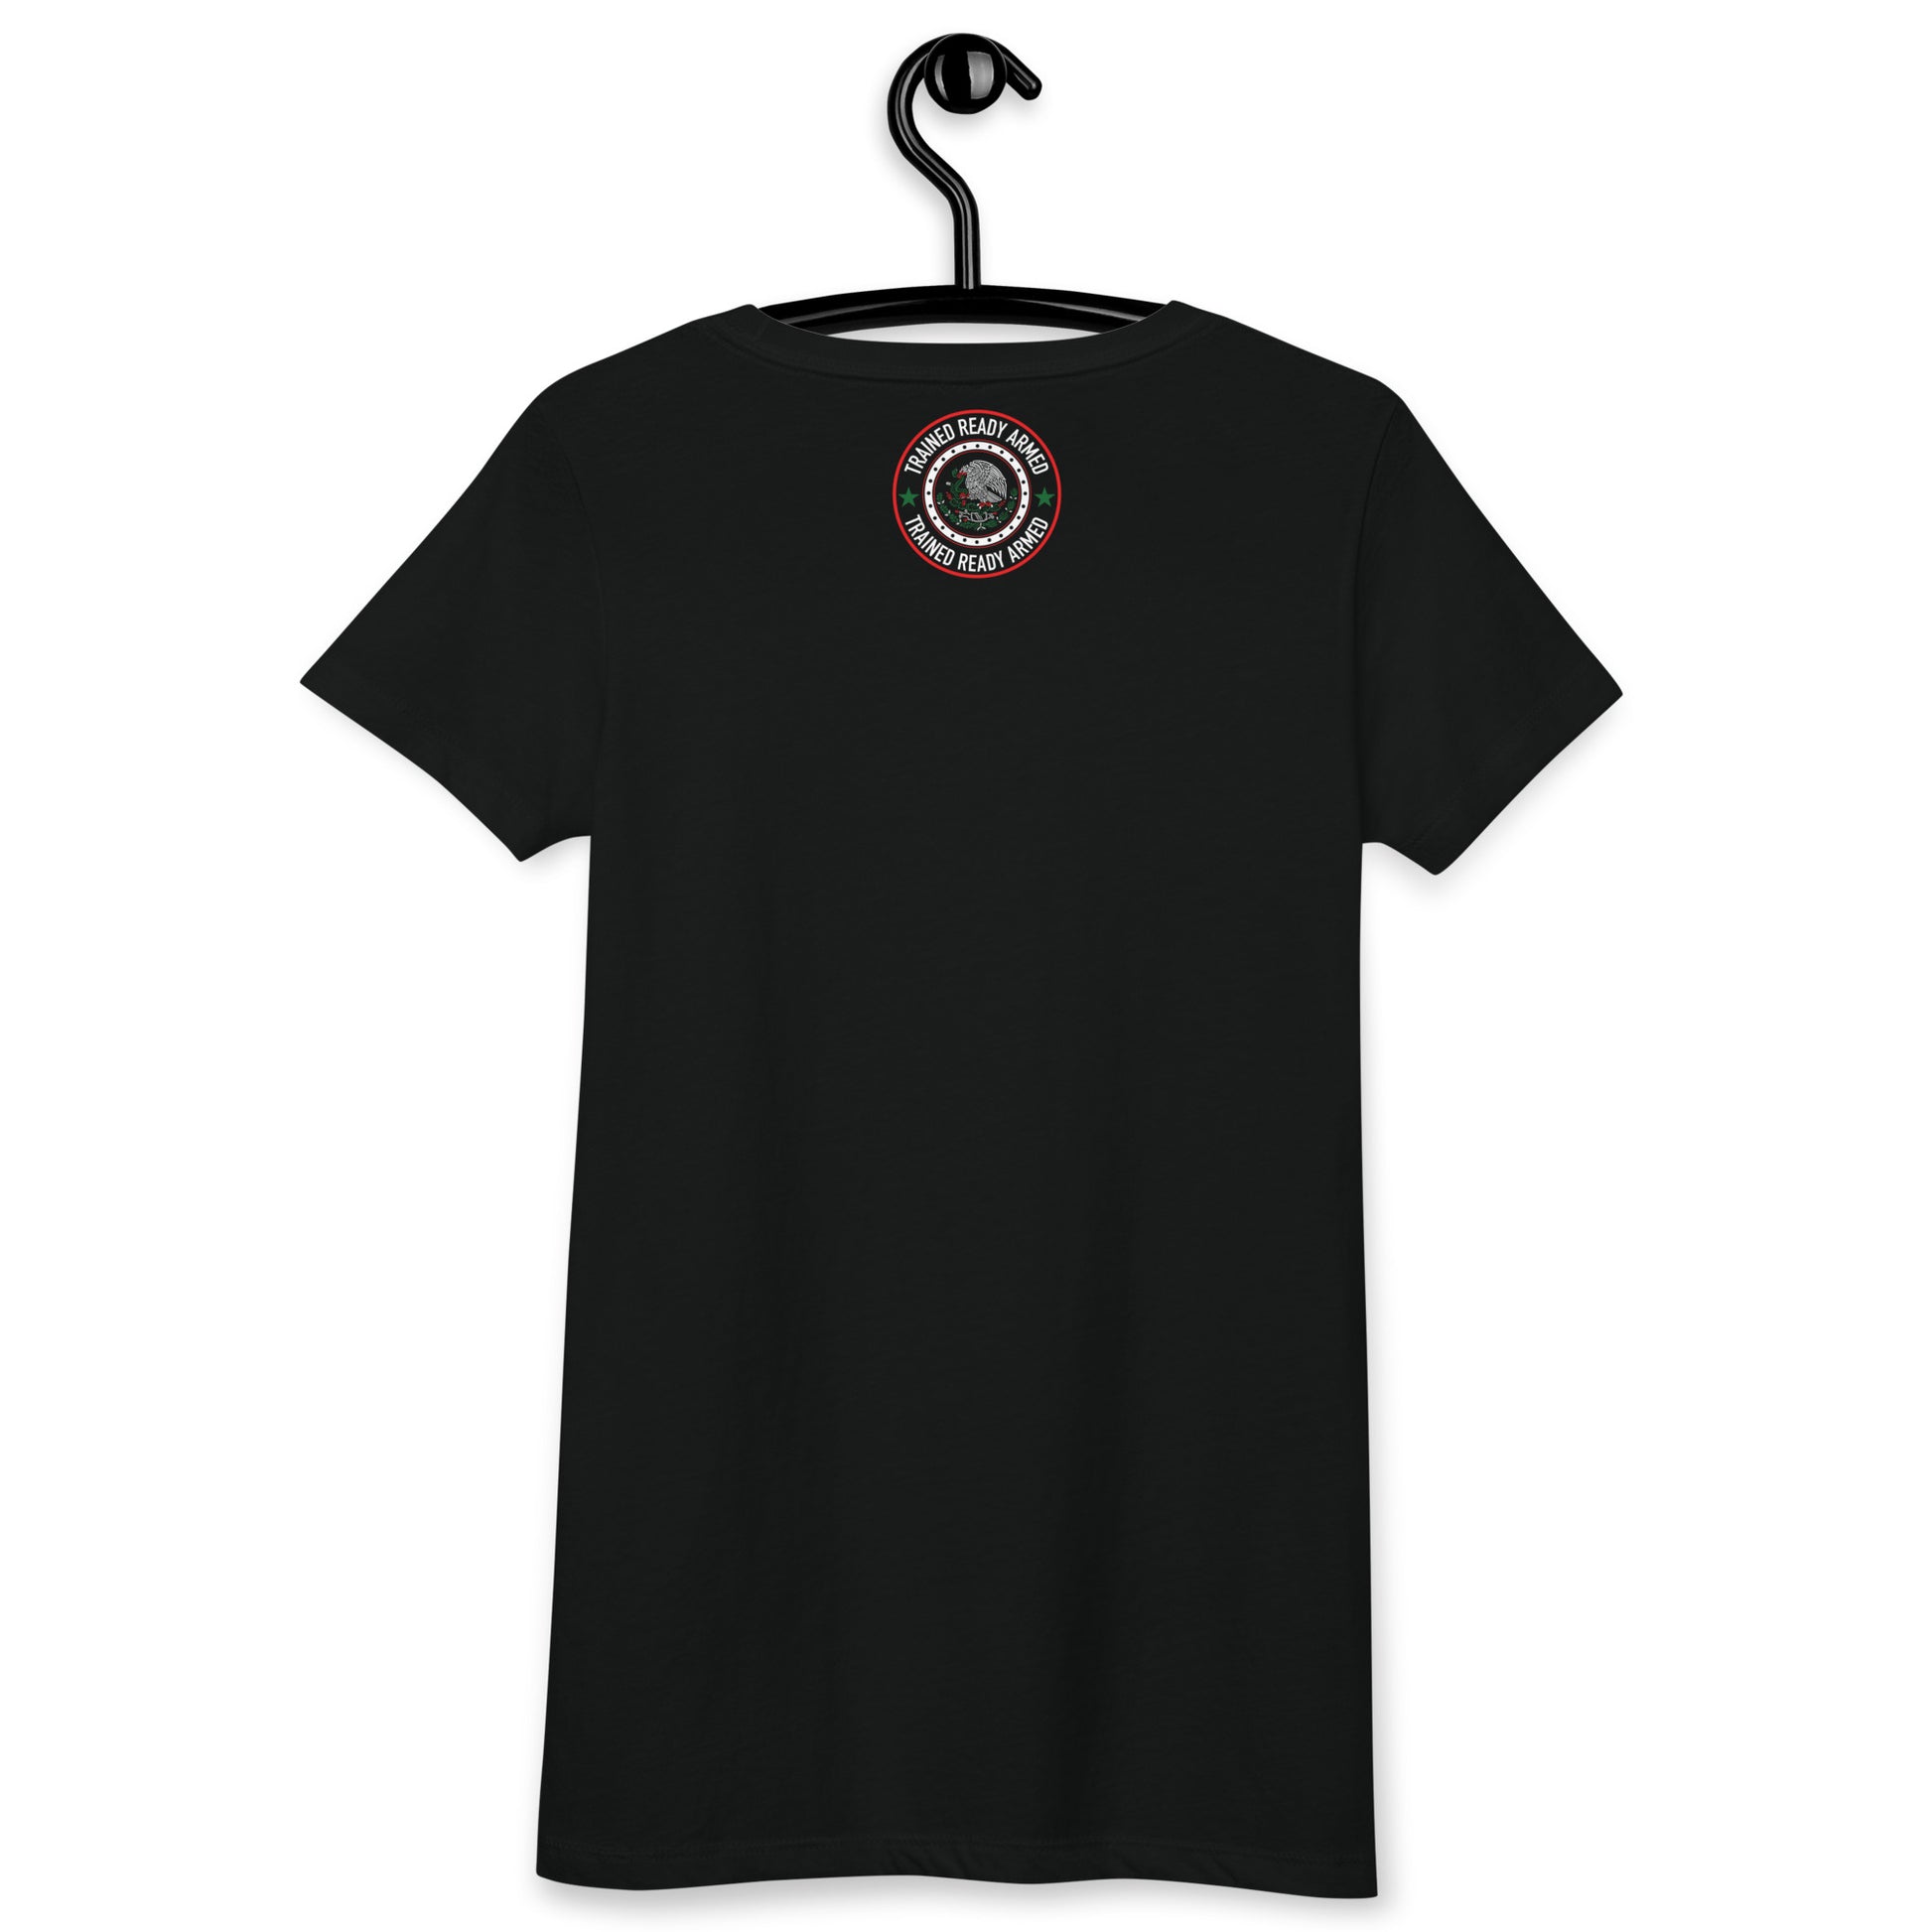 TRA Mexico. 1 fitted t-shirt - Trained Ready Armed Apparel